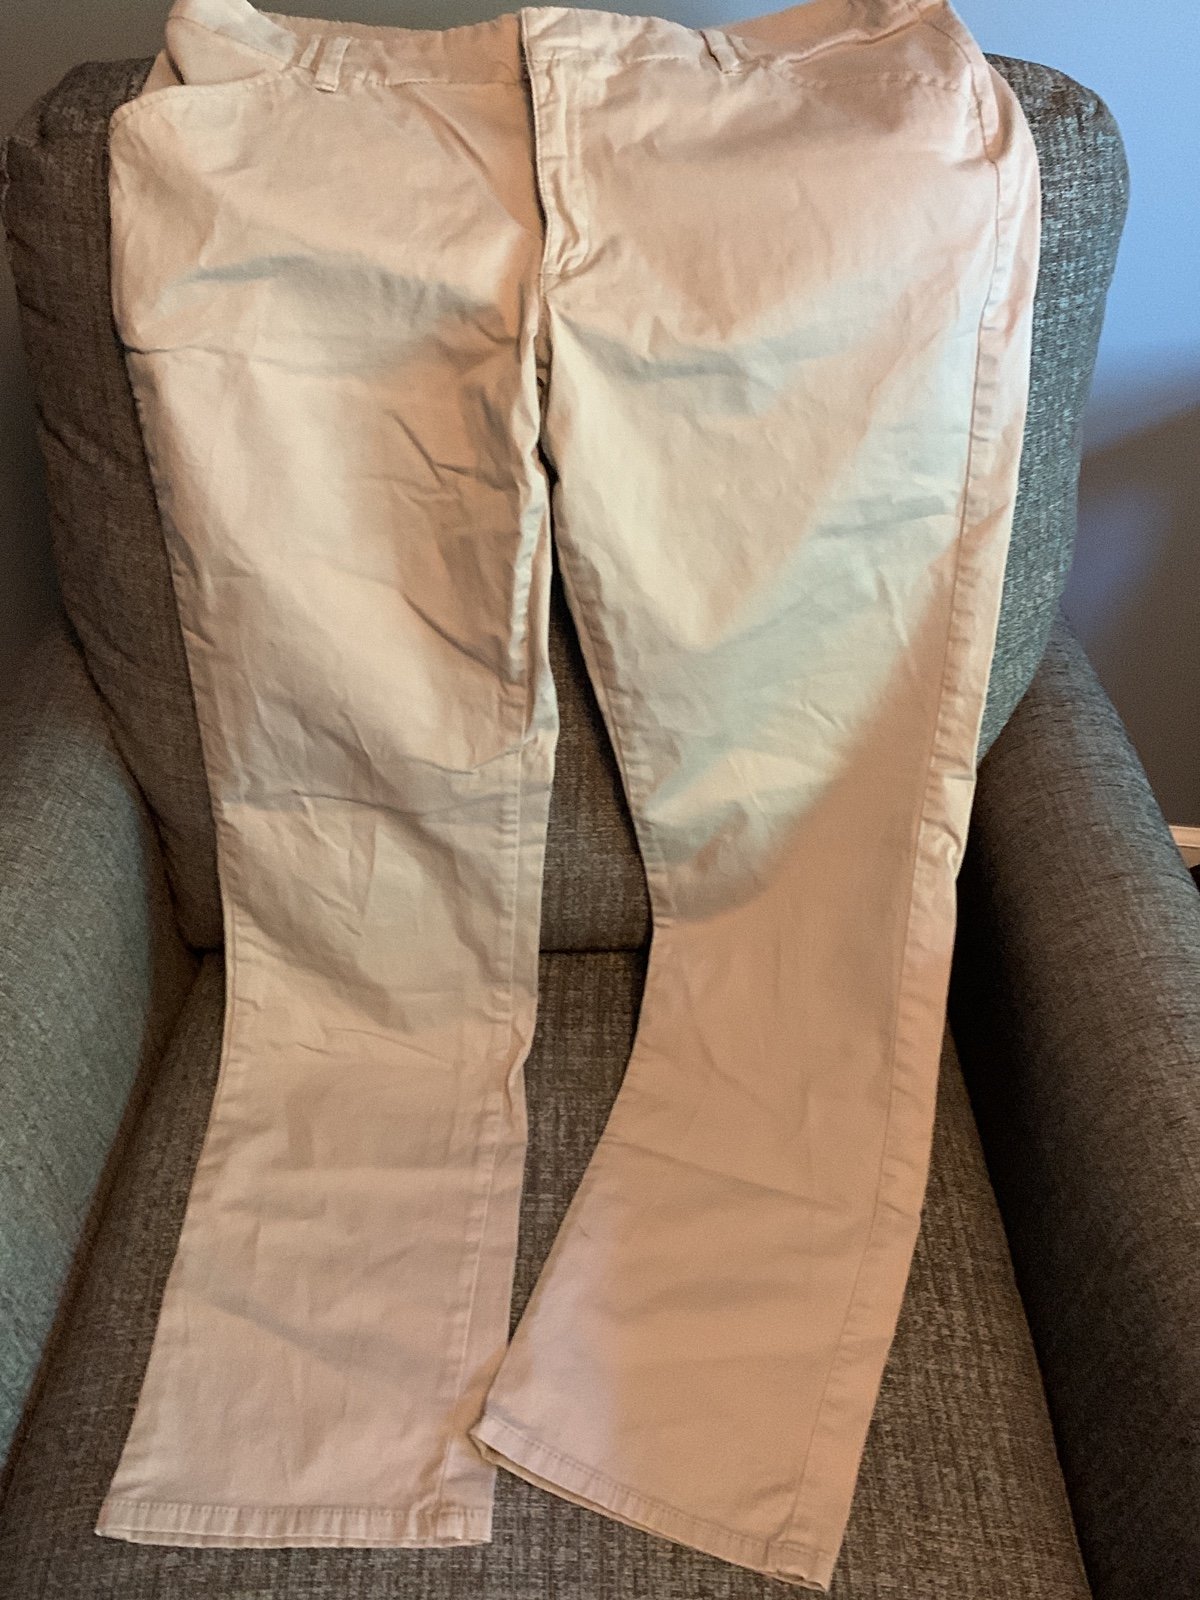 the Lowest price Lee size 14 pants IcH10TXkJ Online Exc